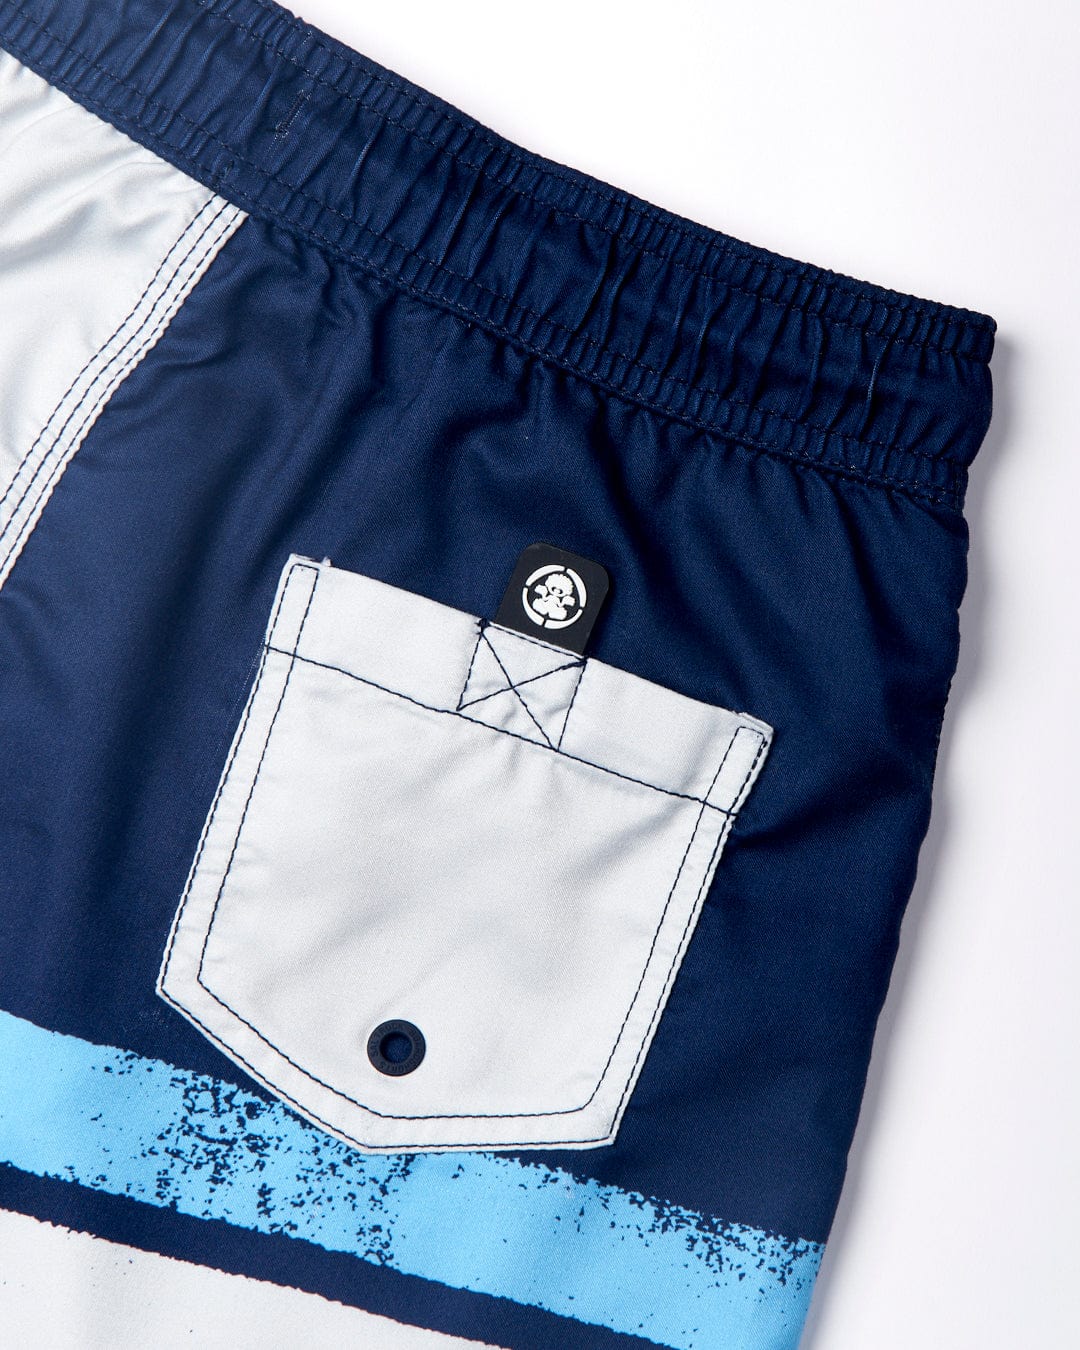 Close-up of a pair of Saltrock Original SR - Kids Swimshorts - Blue with an elasticated waist and a white back pocket featuring a button. Sporting two light blue horizontal stripes at the lower part, these swimshorts also showcase branded dipped rubber end drawstrings for added style.